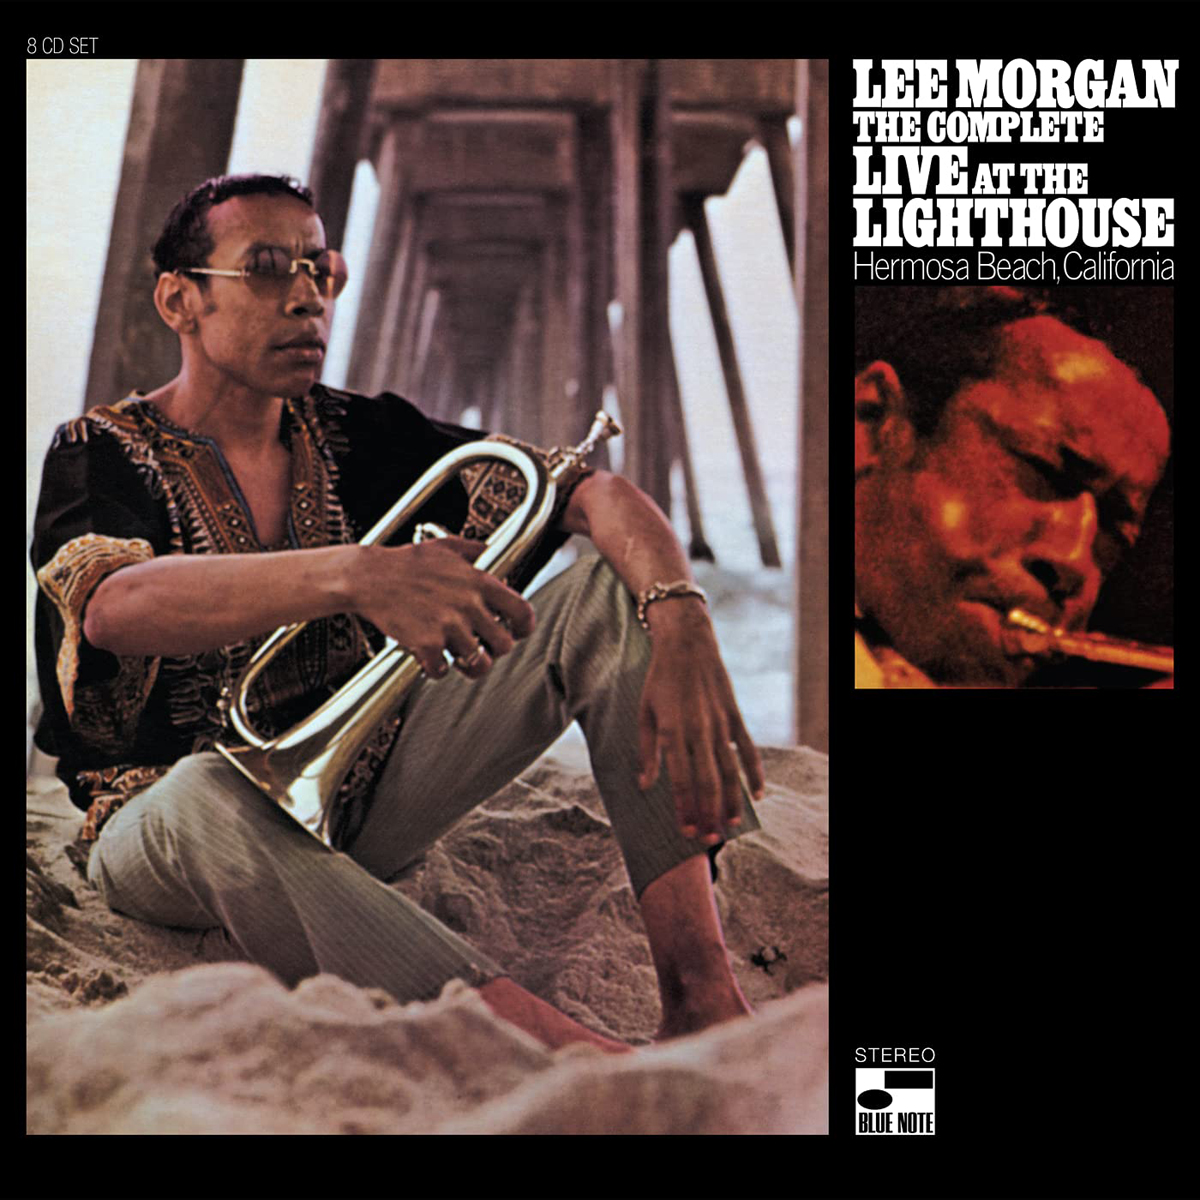 “Lee Morgan: The Complete Live At The Lighthouse, Hermosa Beach California”